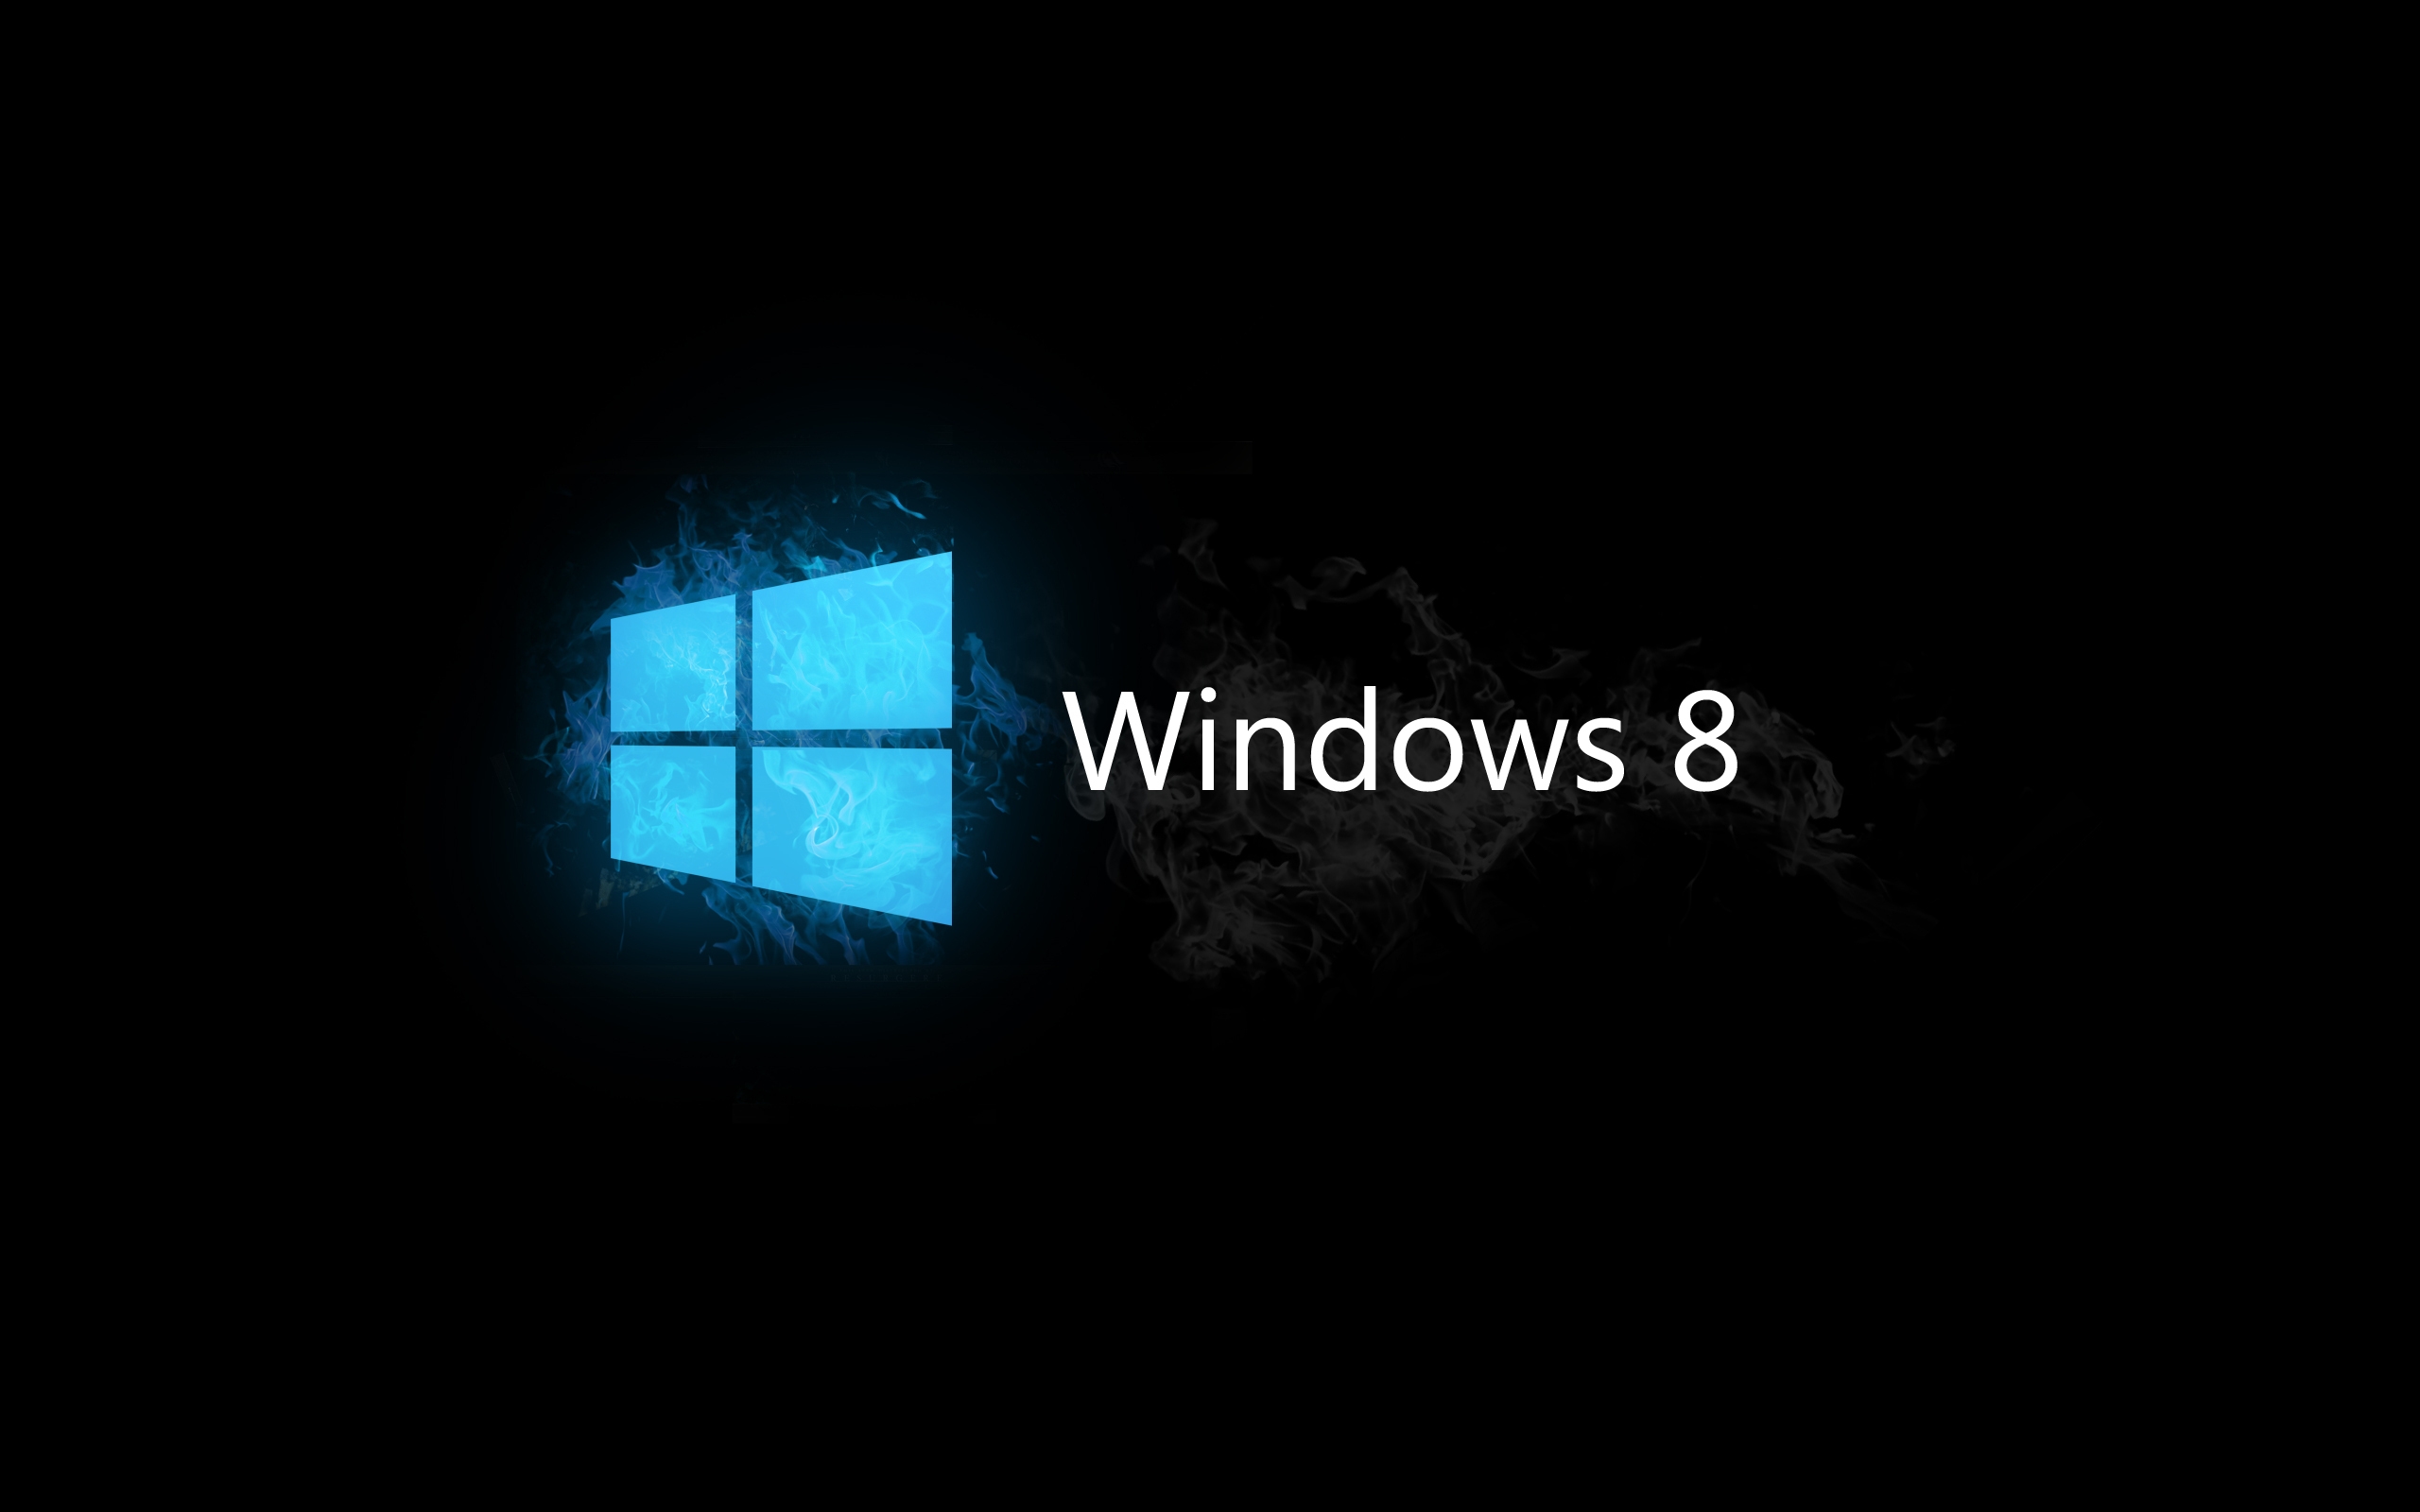 Windows 8 Blue and Black for 2560 x 1600 widescreen resolution